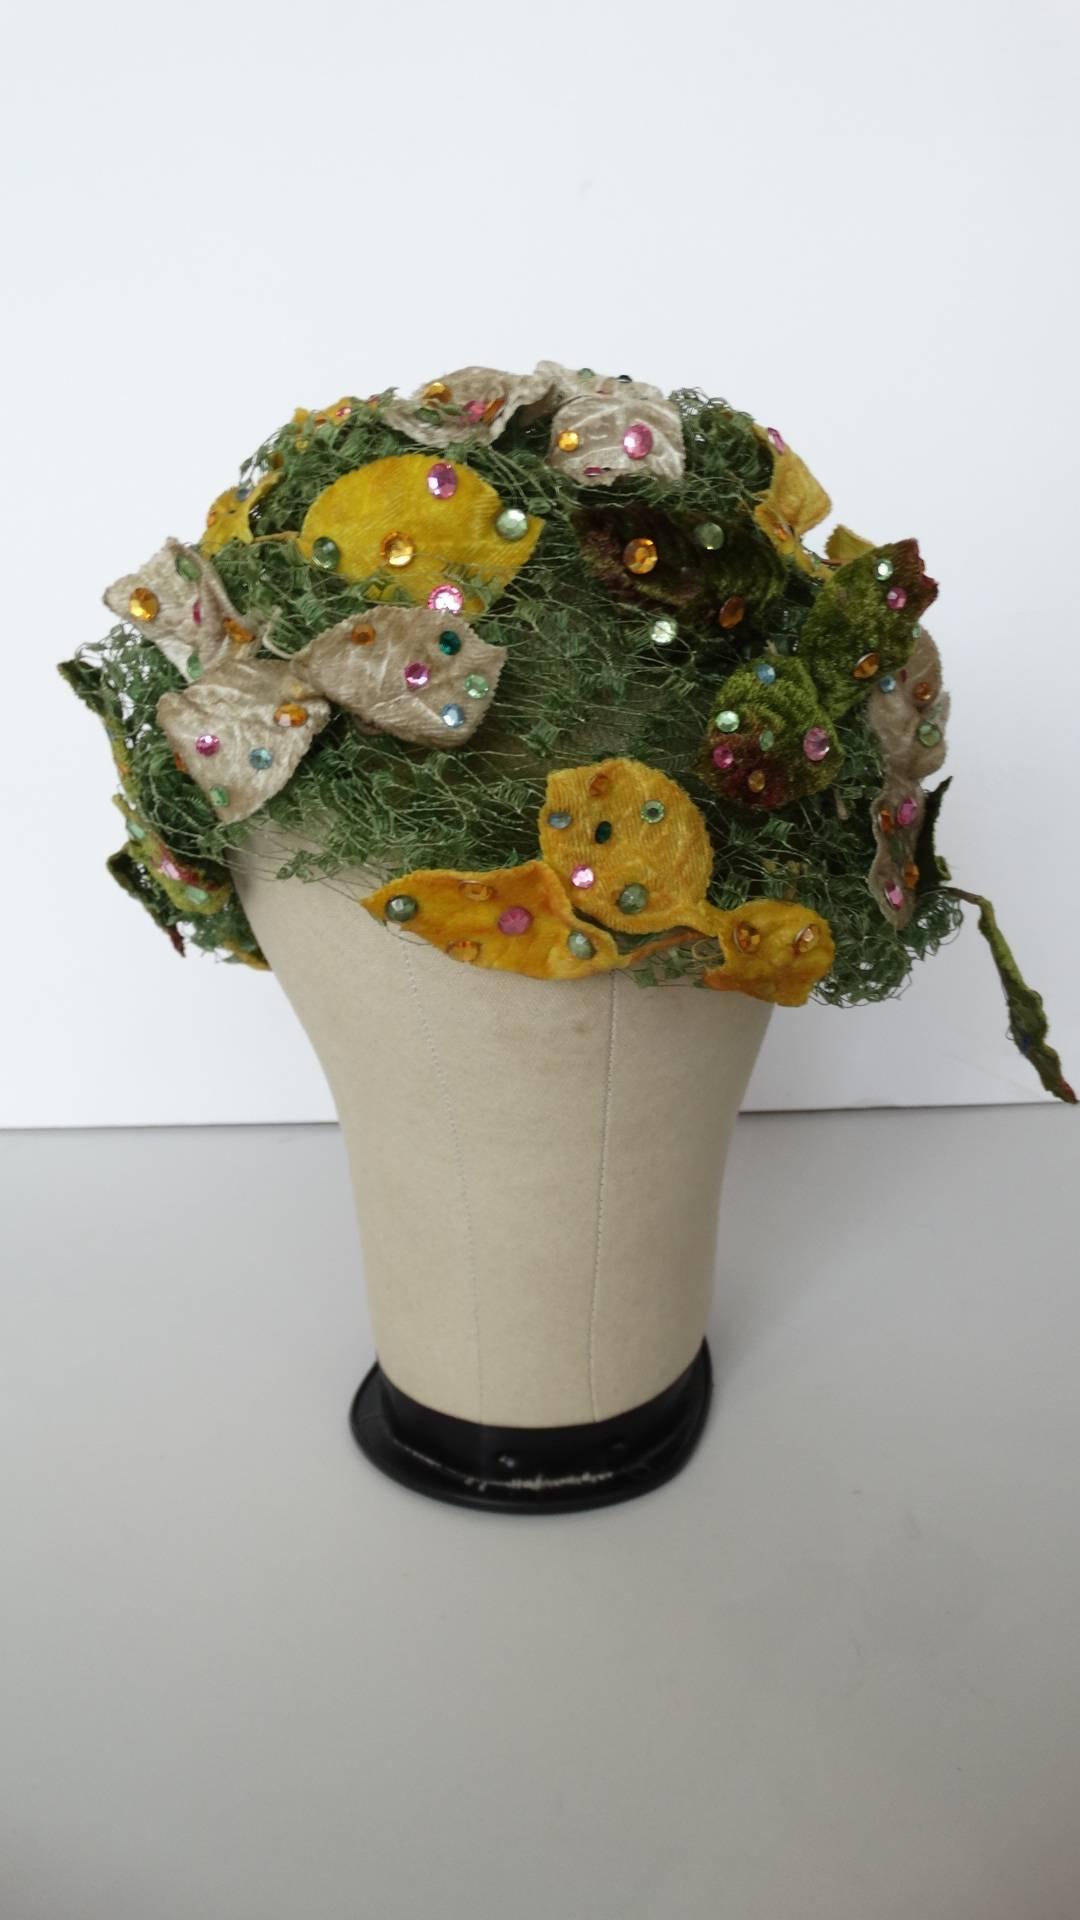 This is a original Christian Dior Turban designed for Cherry & Webb.  This hat is constructed with green tule the leaves covered in multi colored rhinestones. Beautiful for a garden party or just because! Made in France sz Meduim 21 inches in